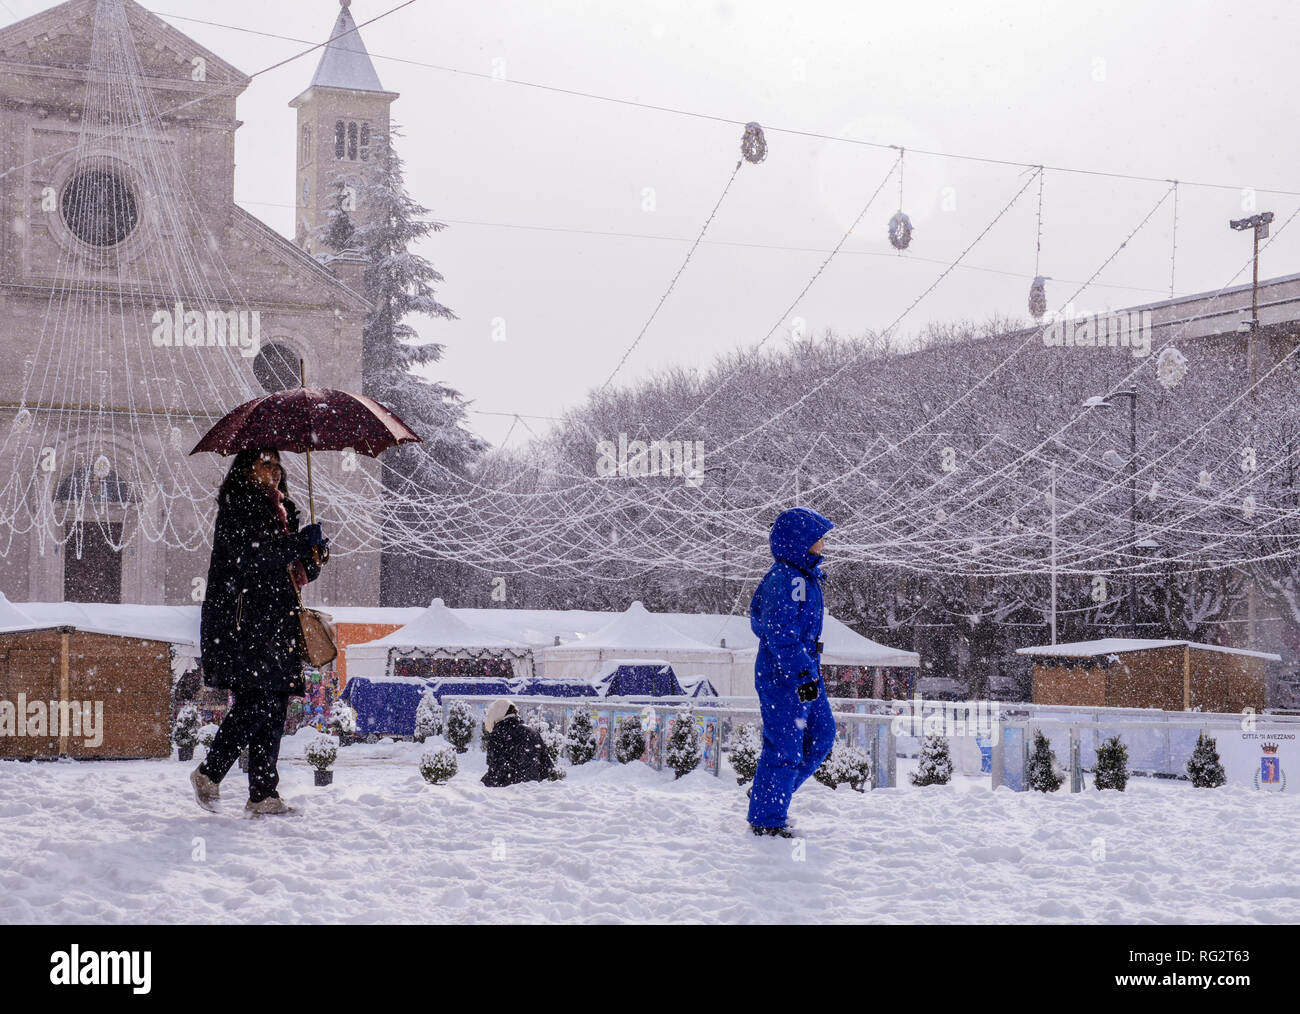 Woman and child, walking in snow during snowstorm, Avezzano, Abruzzo region, Italy, Europe Stock Photo